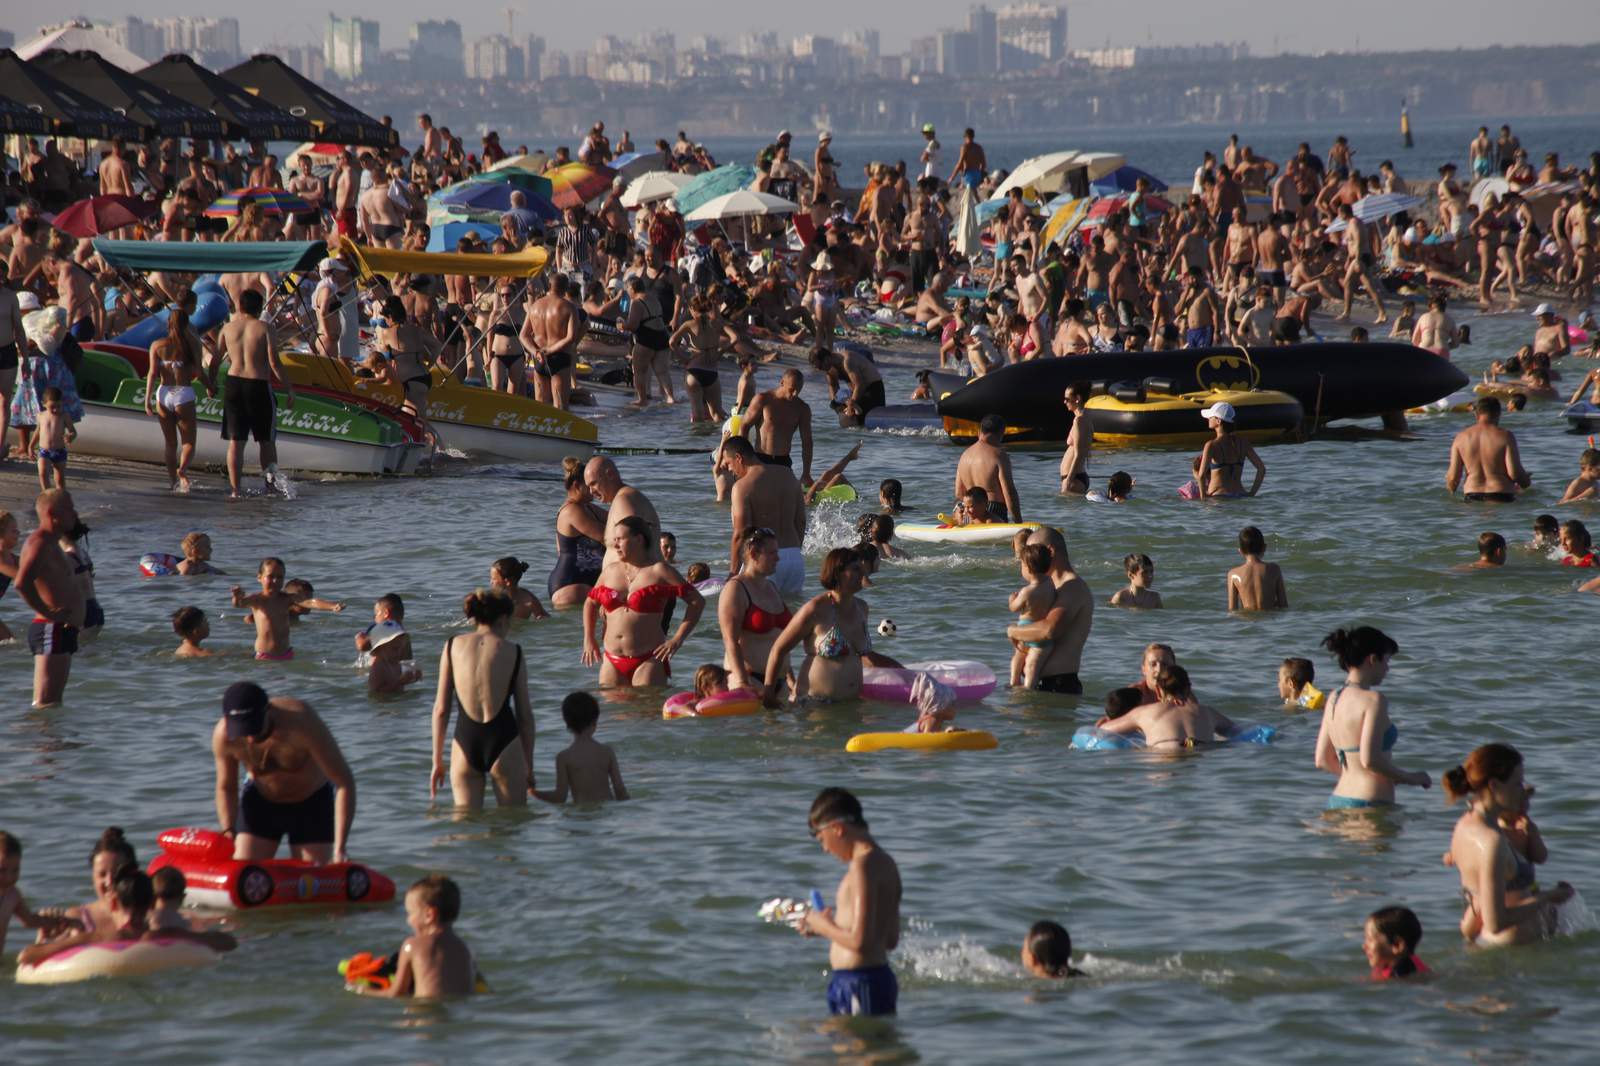 In Russia and Ukraine, no social distance on crowded beaches